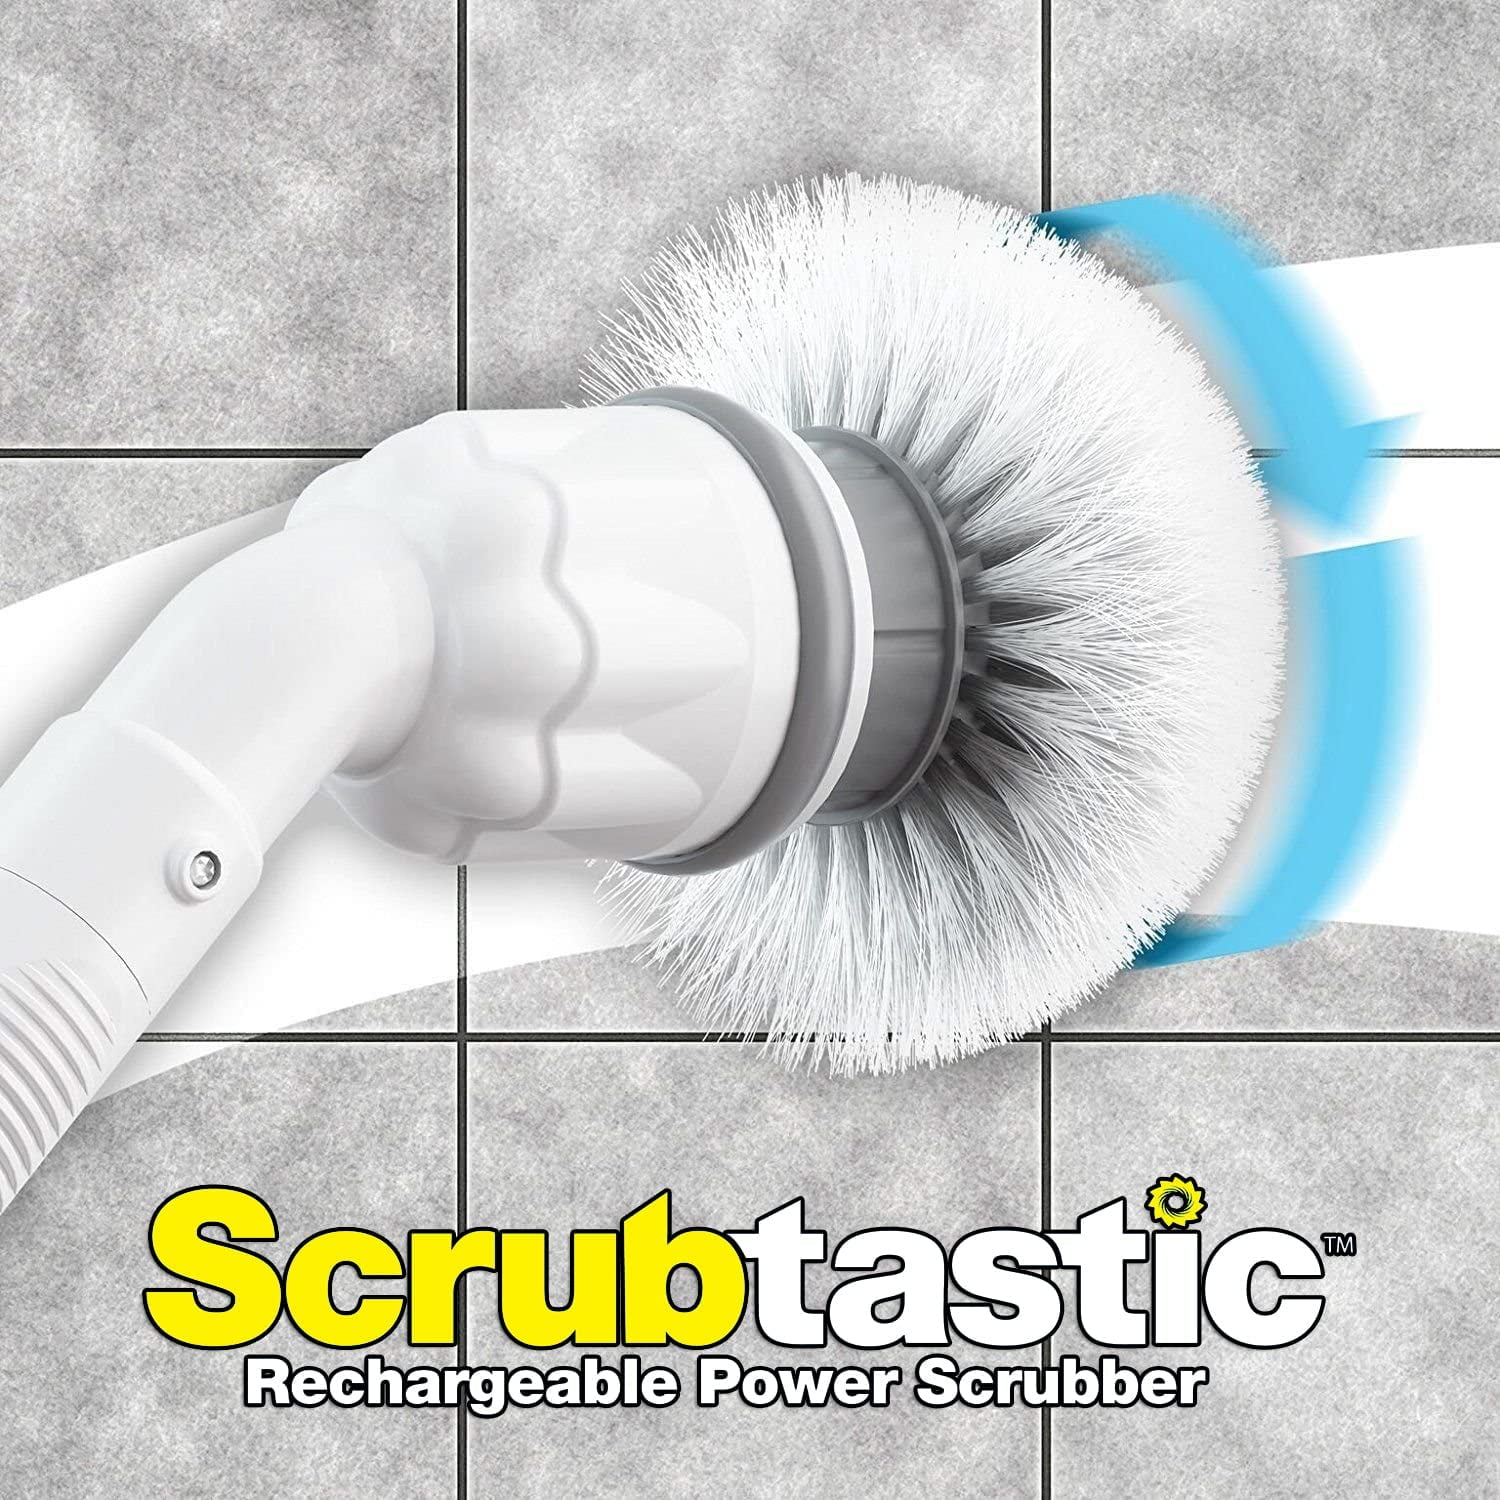 Scrubtastic Rechargeable Power Scrubber – Bell + Howell